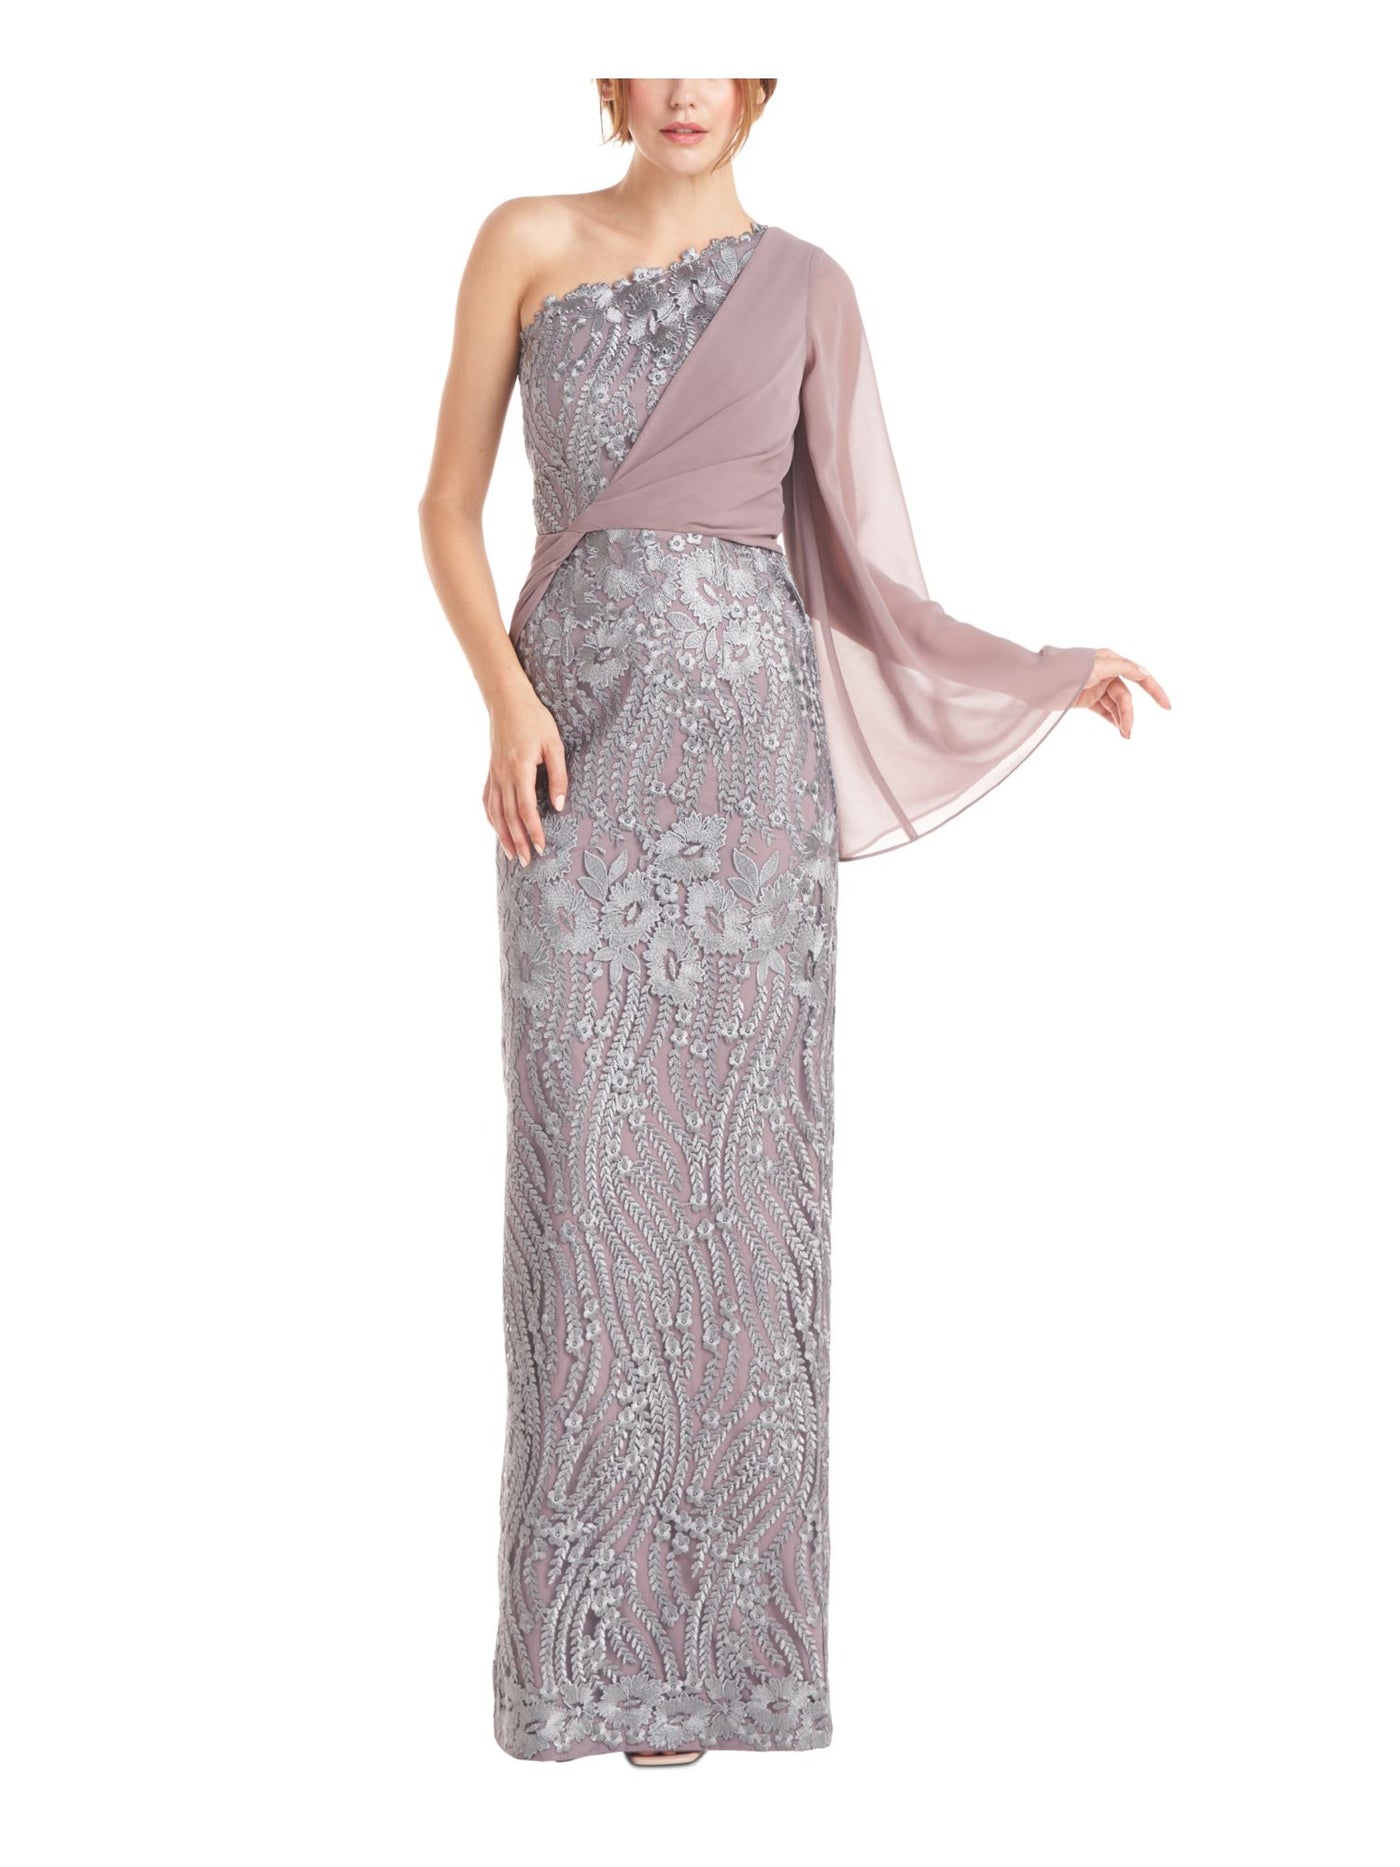 JS COLLECTIONS Womens Purple Embroidered Zippered Overlay Lined Floral Long Sleeve Asymmetrical Neckline Full-Length Evening Gown Dress 10